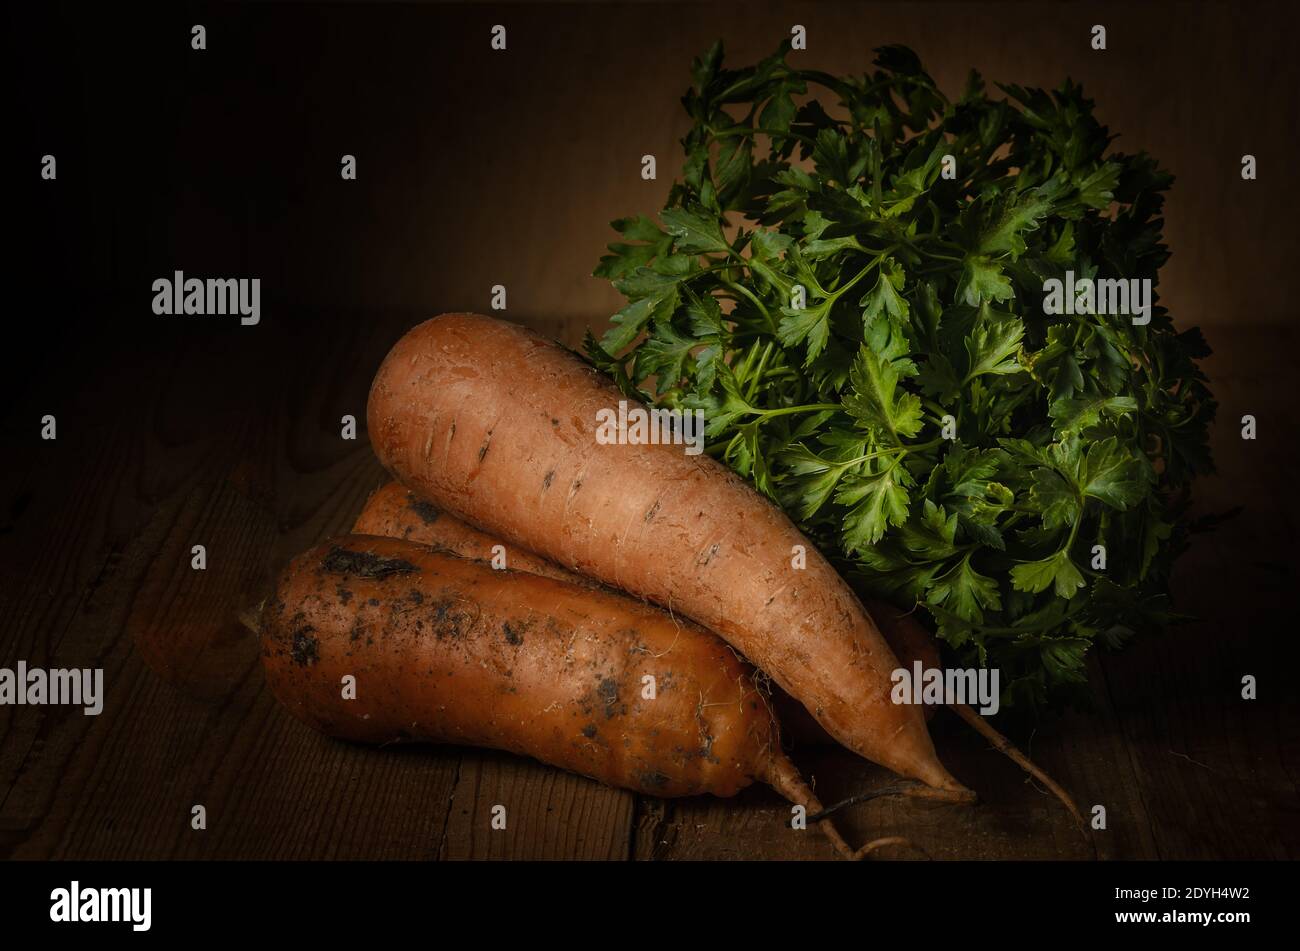 ripe carrots and a bunch of parsley in a rustic style on a dark wooden background Stock Photo